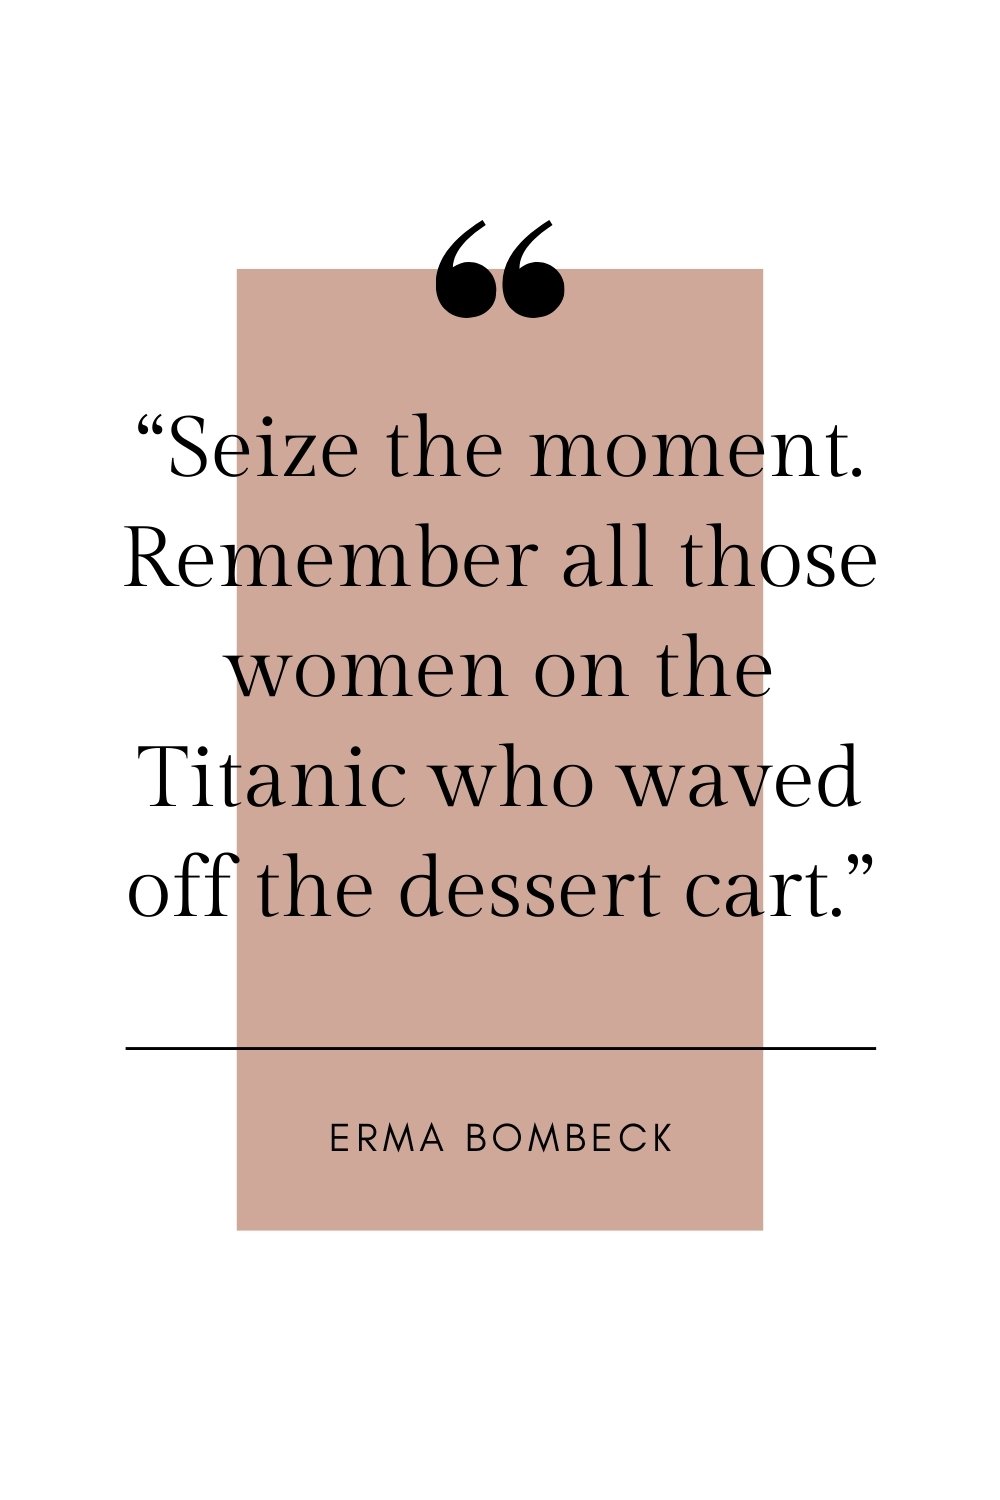 erma bombeck food quote